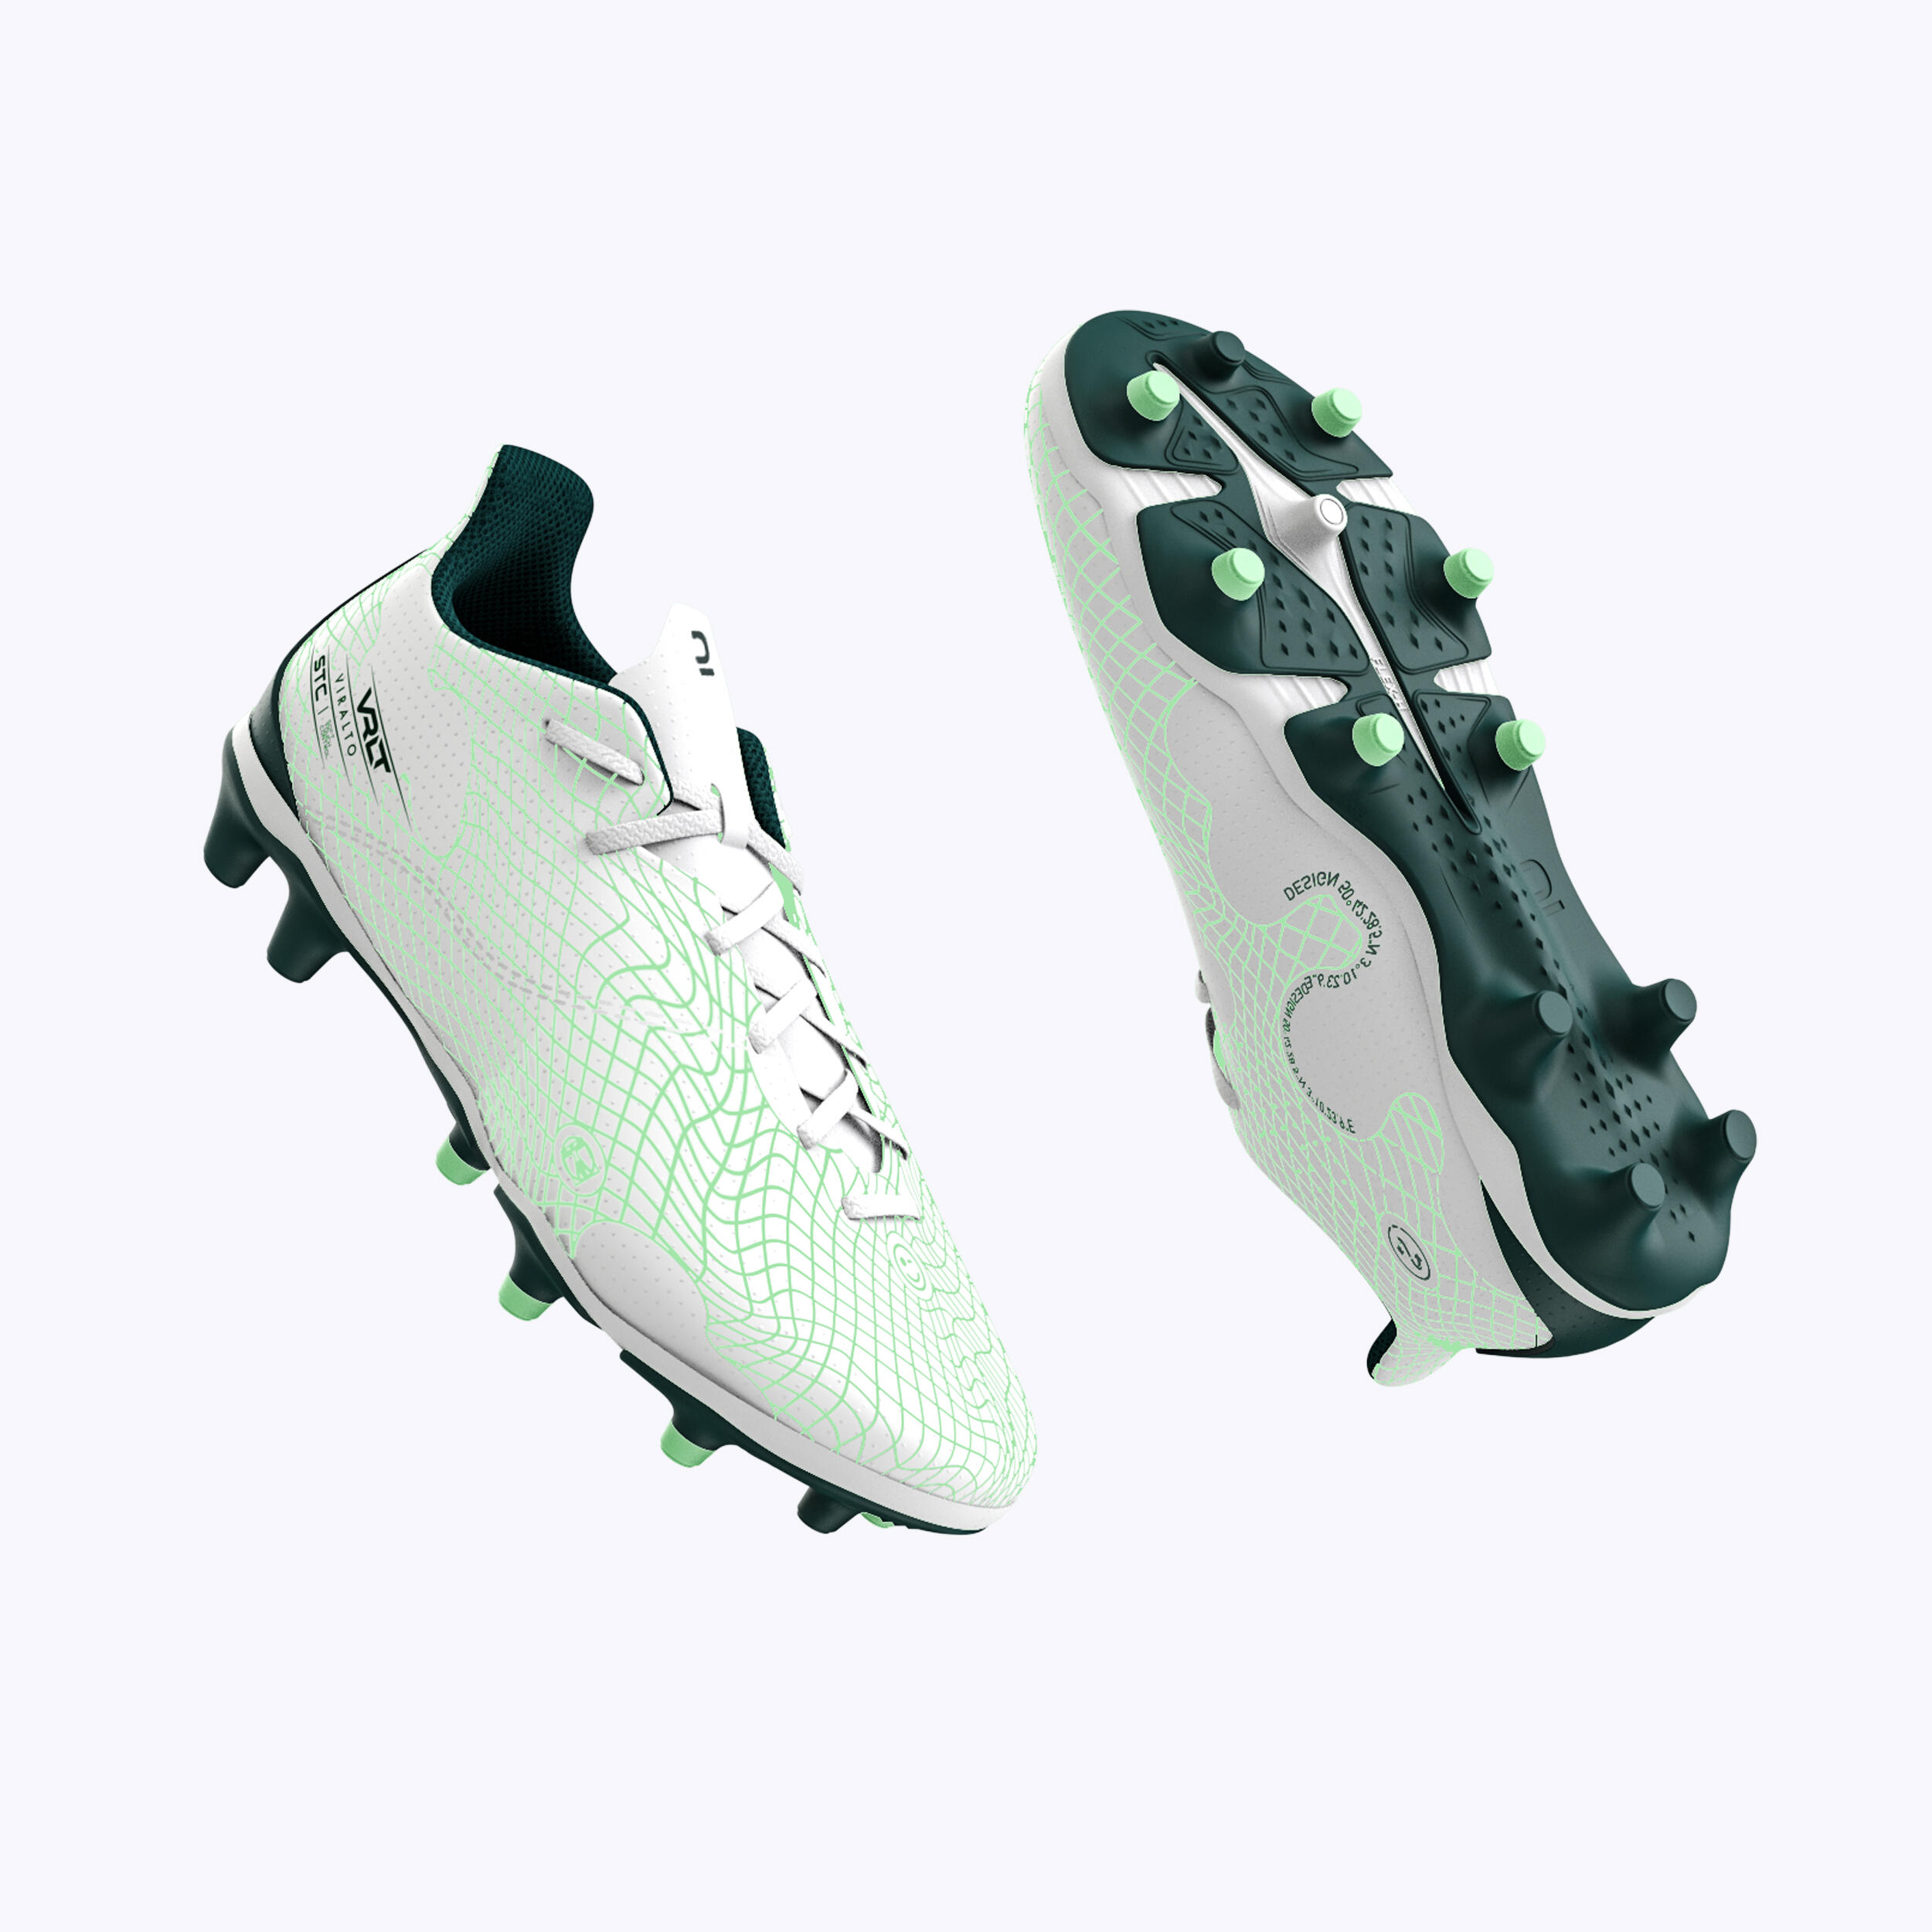 Kids' Lace-Up Football Boots Viralto I FG - Ice Green 1/6